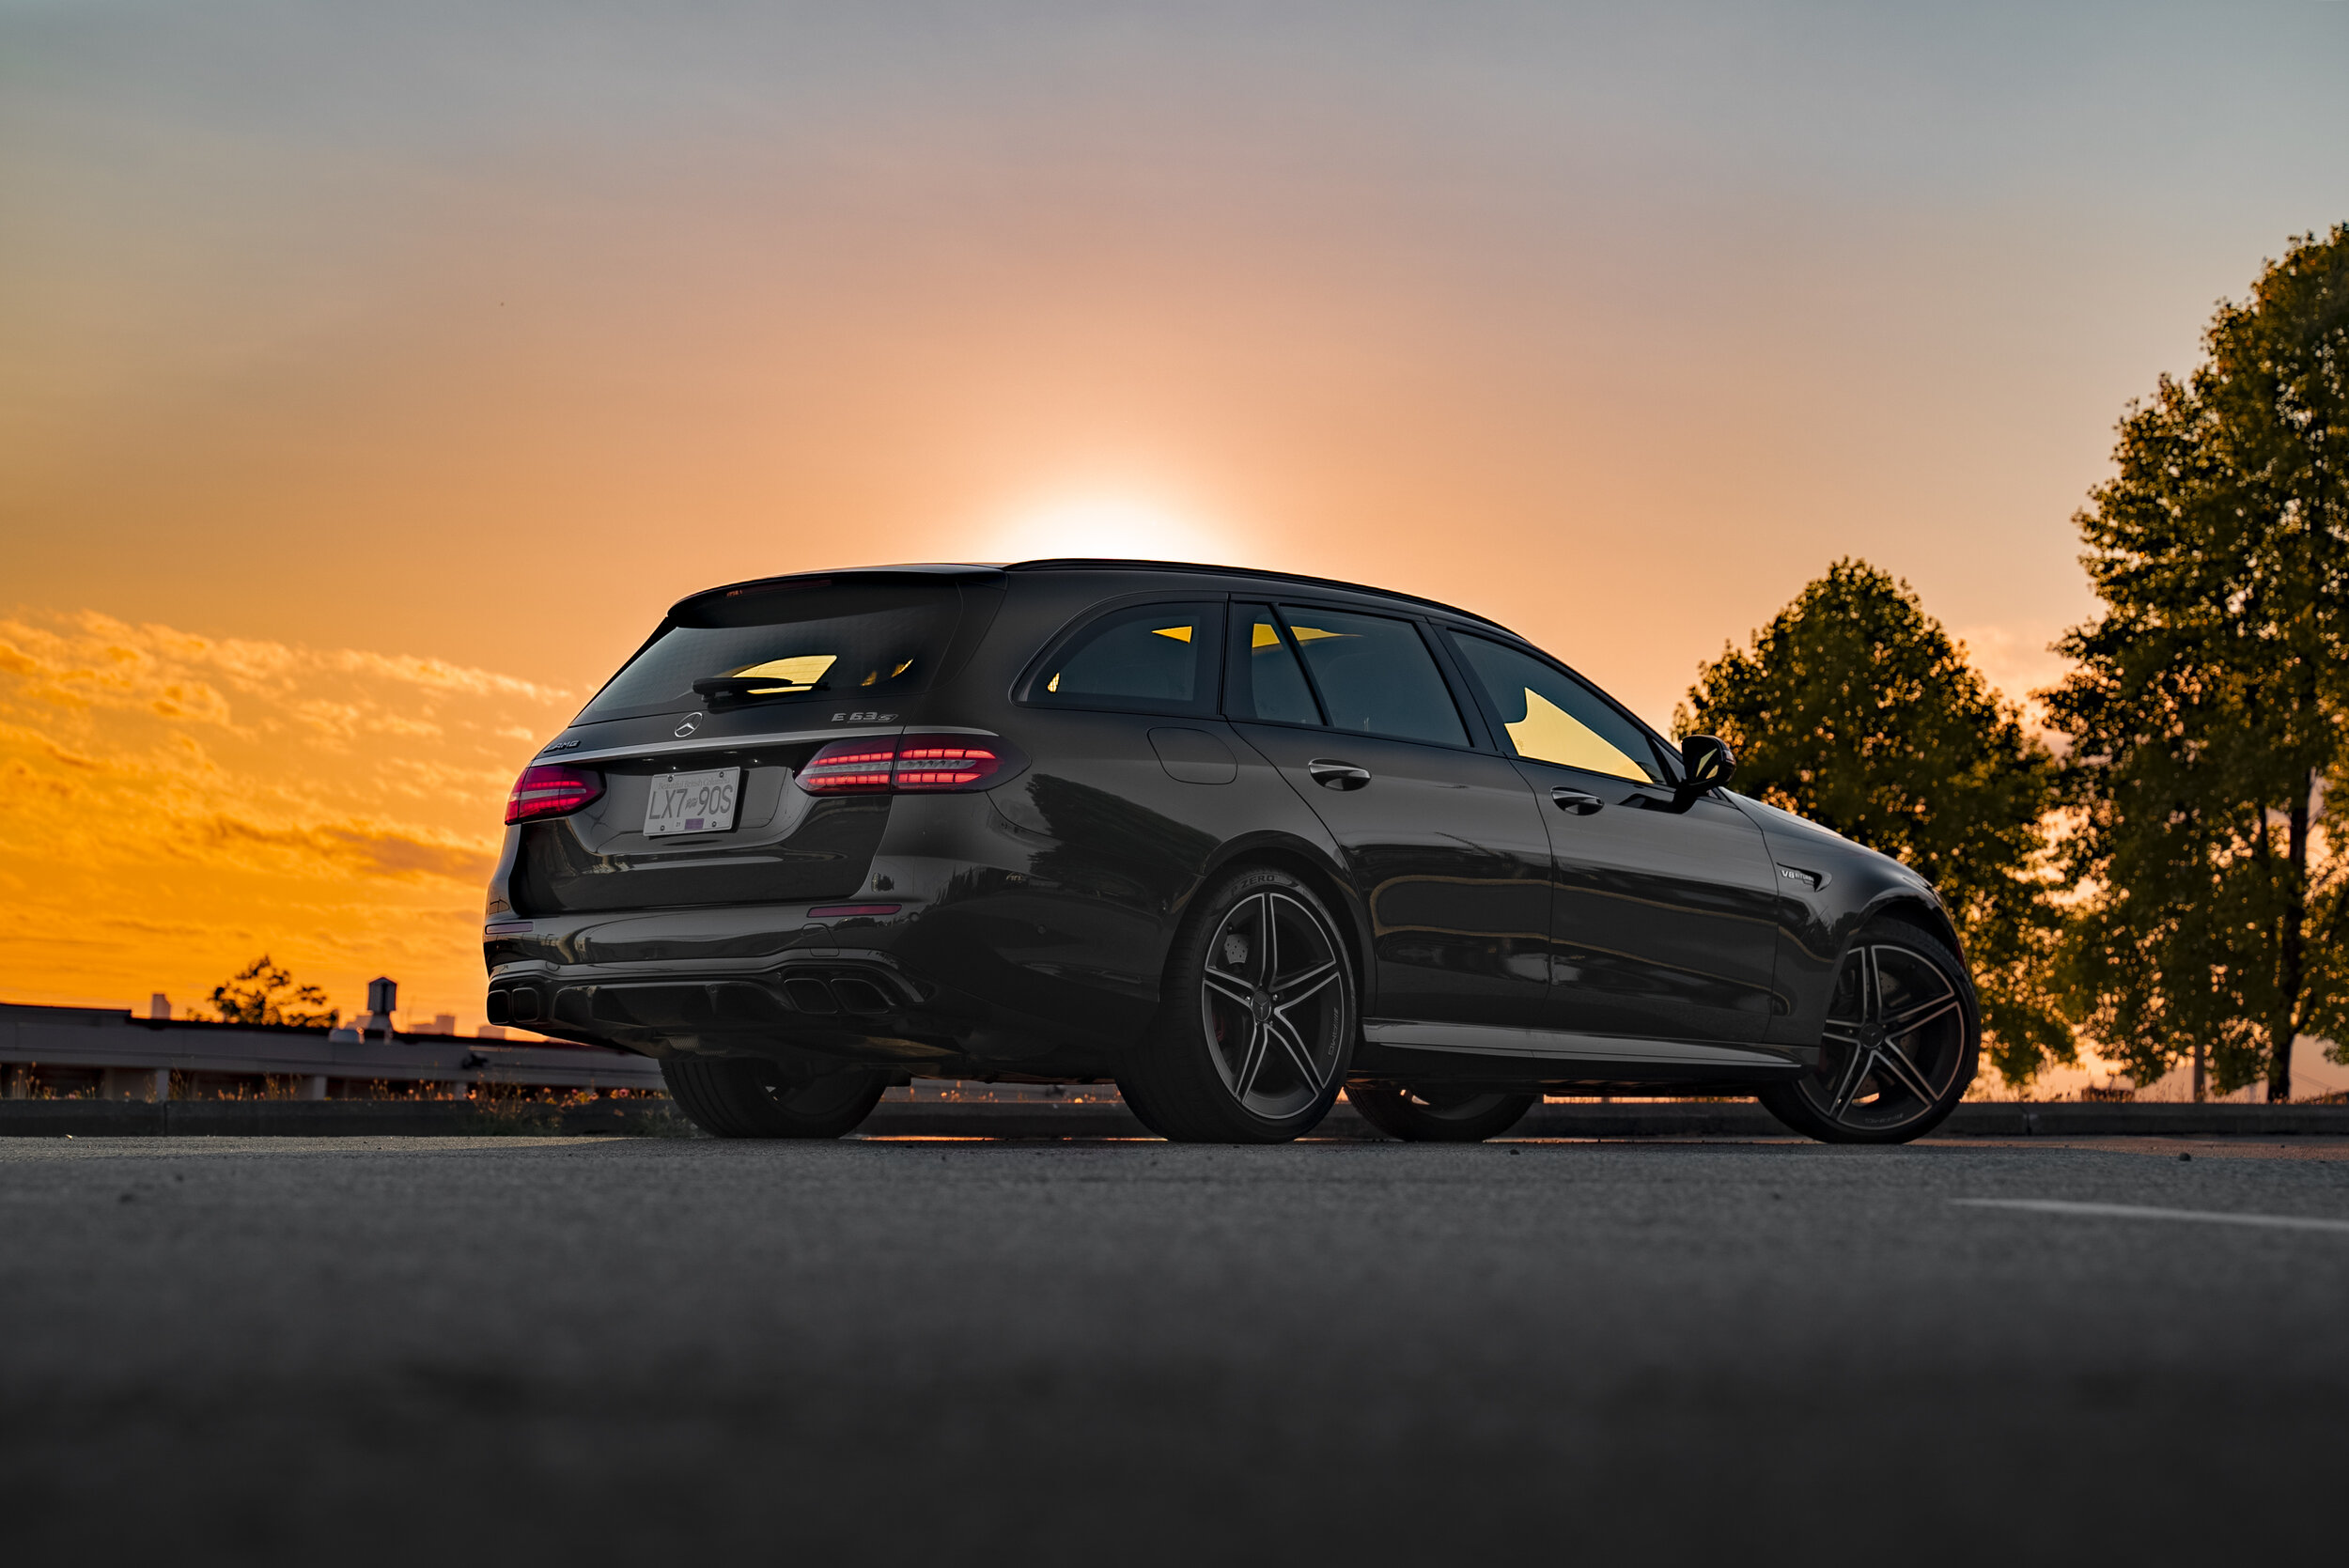 Mercedes-Amg E 63 S Wagon Wallpapers